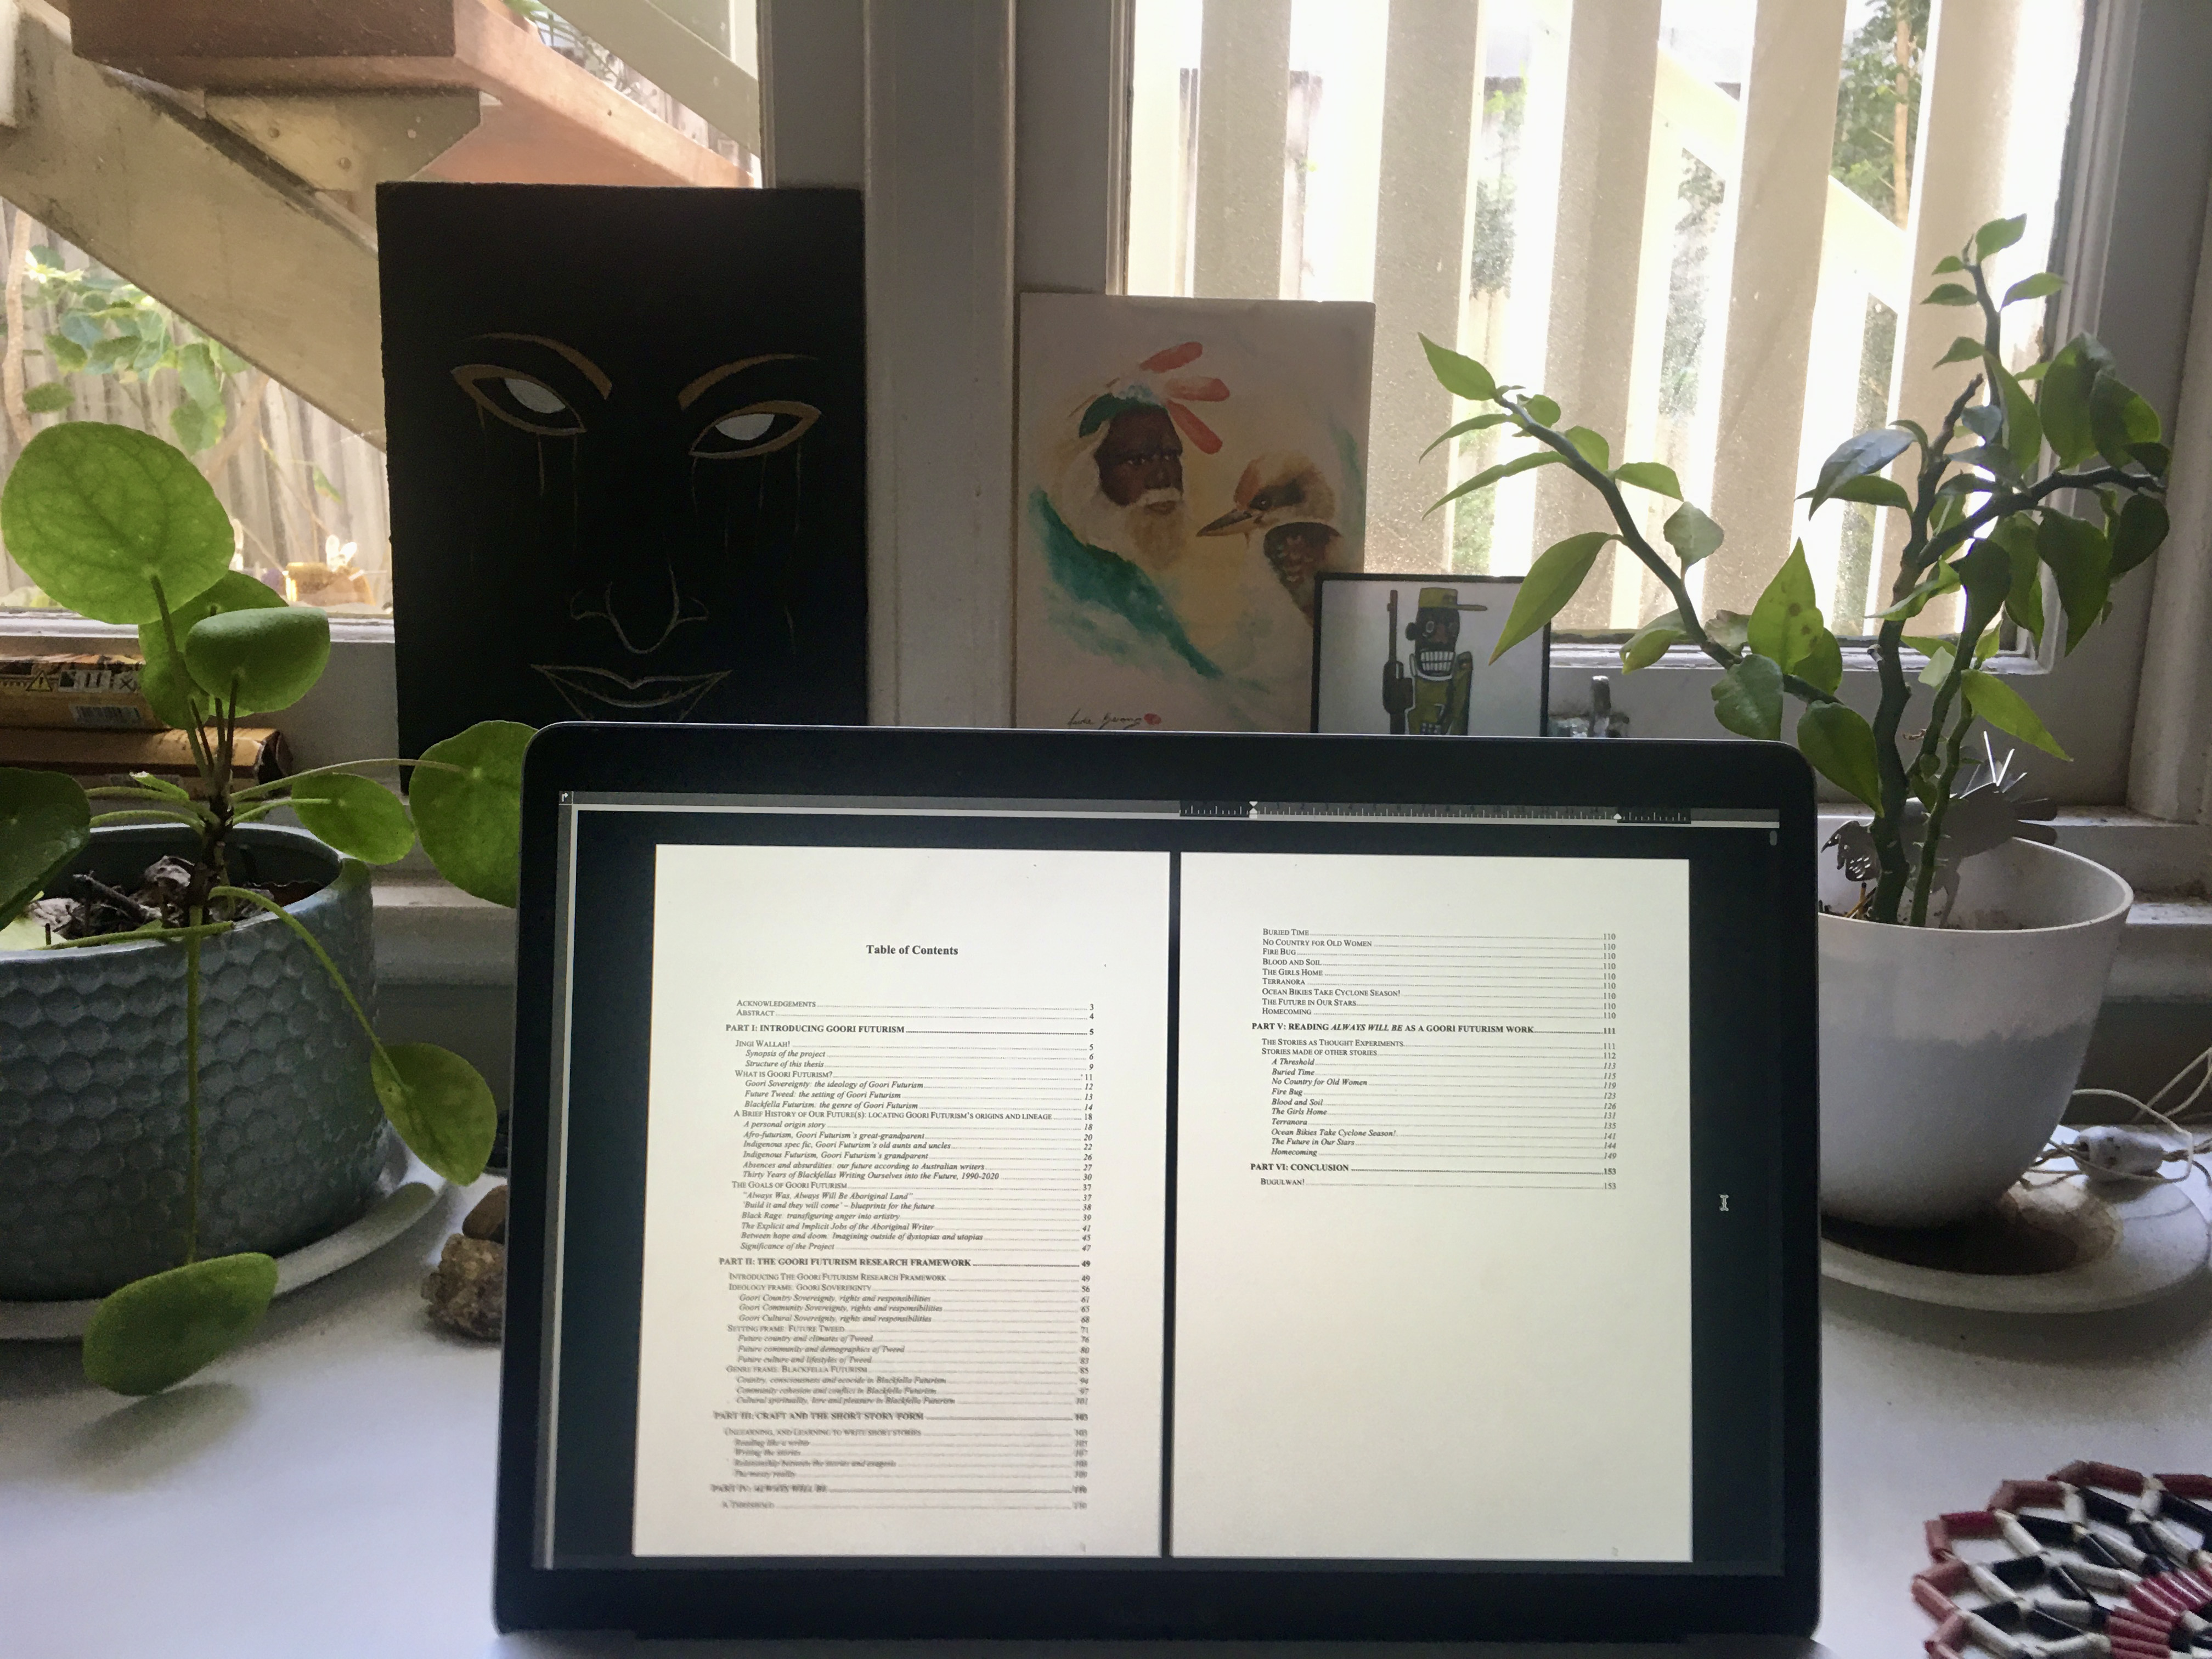 On a desk with pot plants and artwork is an iPad showing the contents page of Mykaela Saunders' PhD thesis